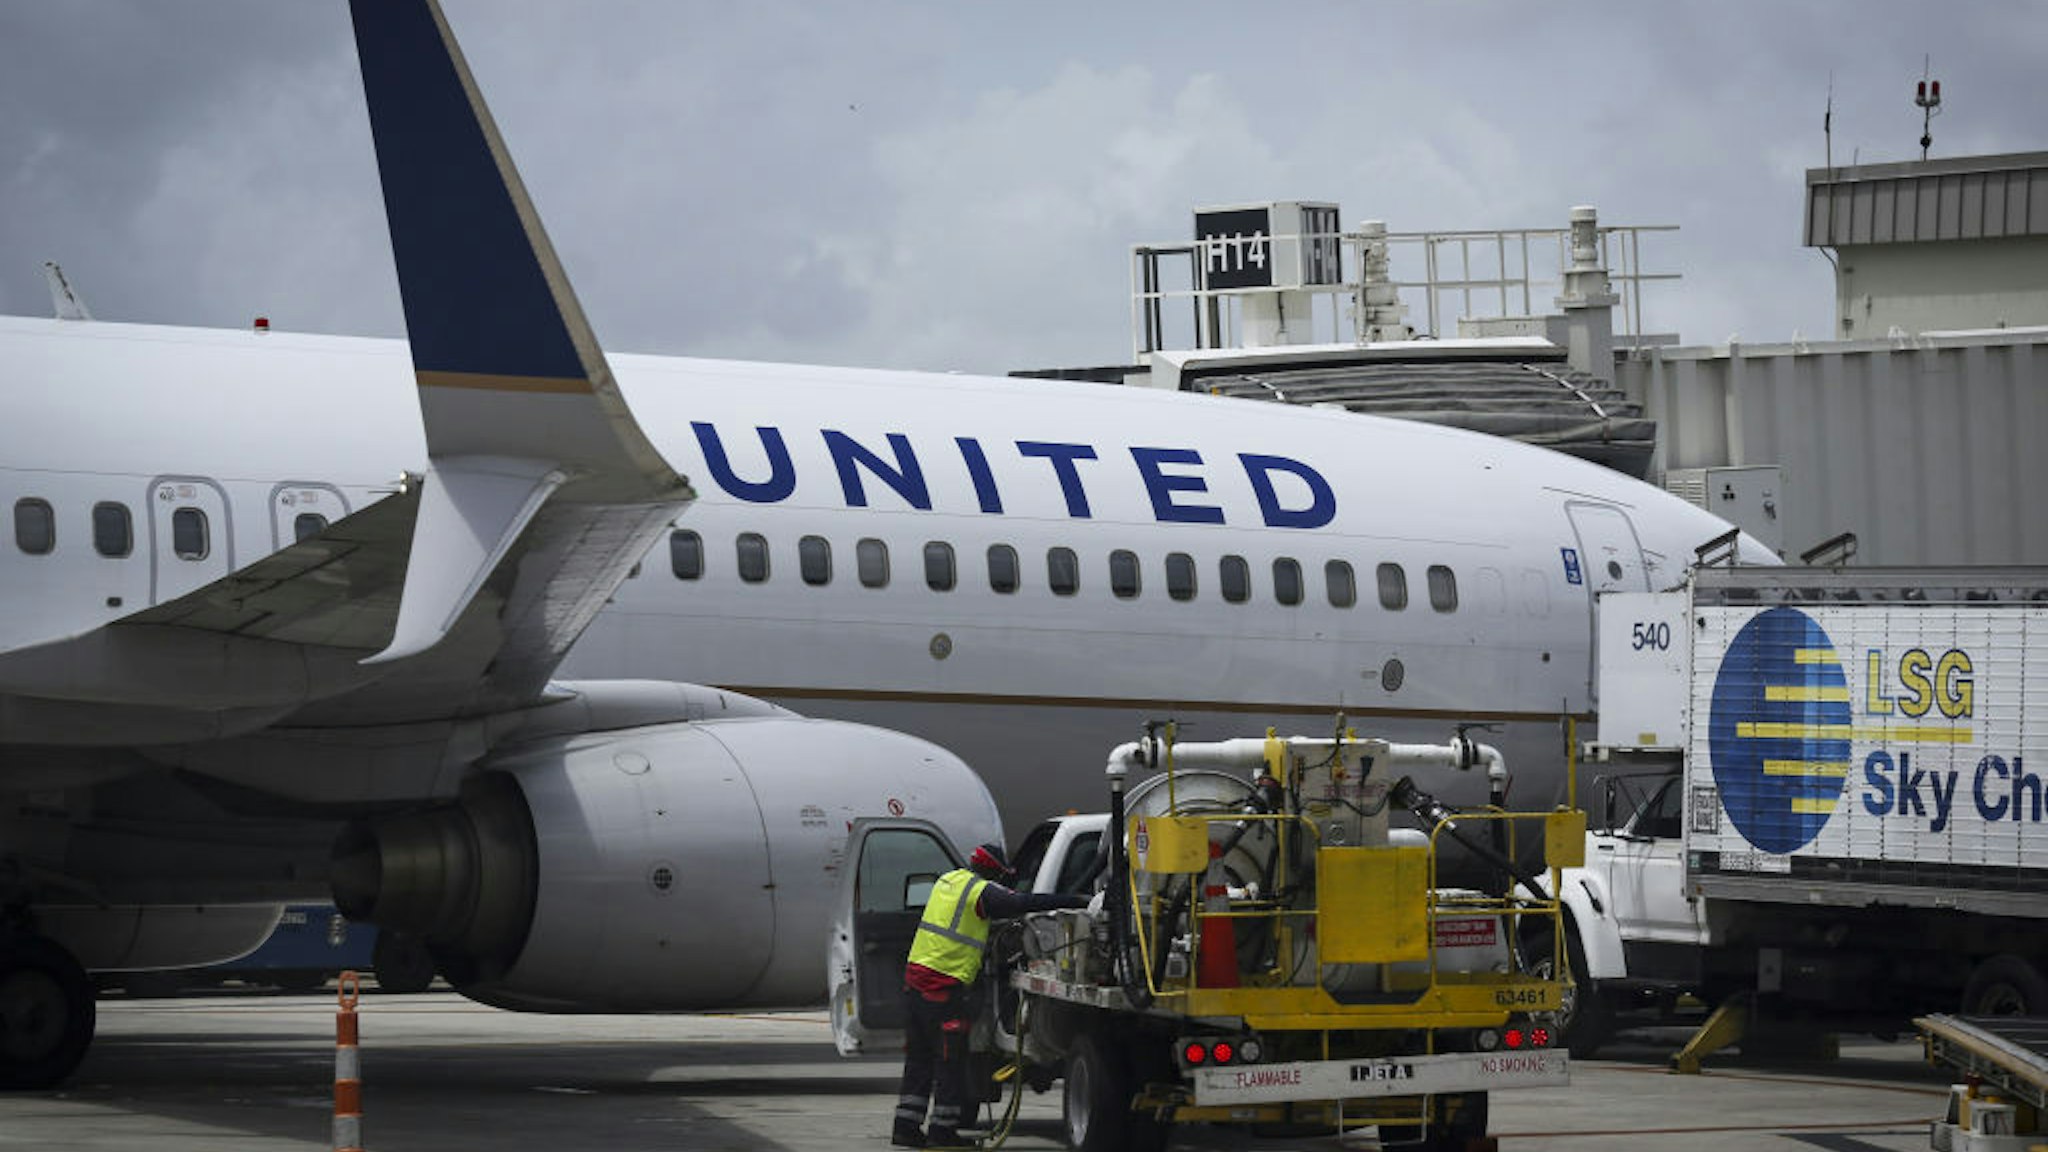 June 16: An United Airlines airplane is seen at a gate of Miami International Airport, in Miami, Florida, United States on June 16, 2021.